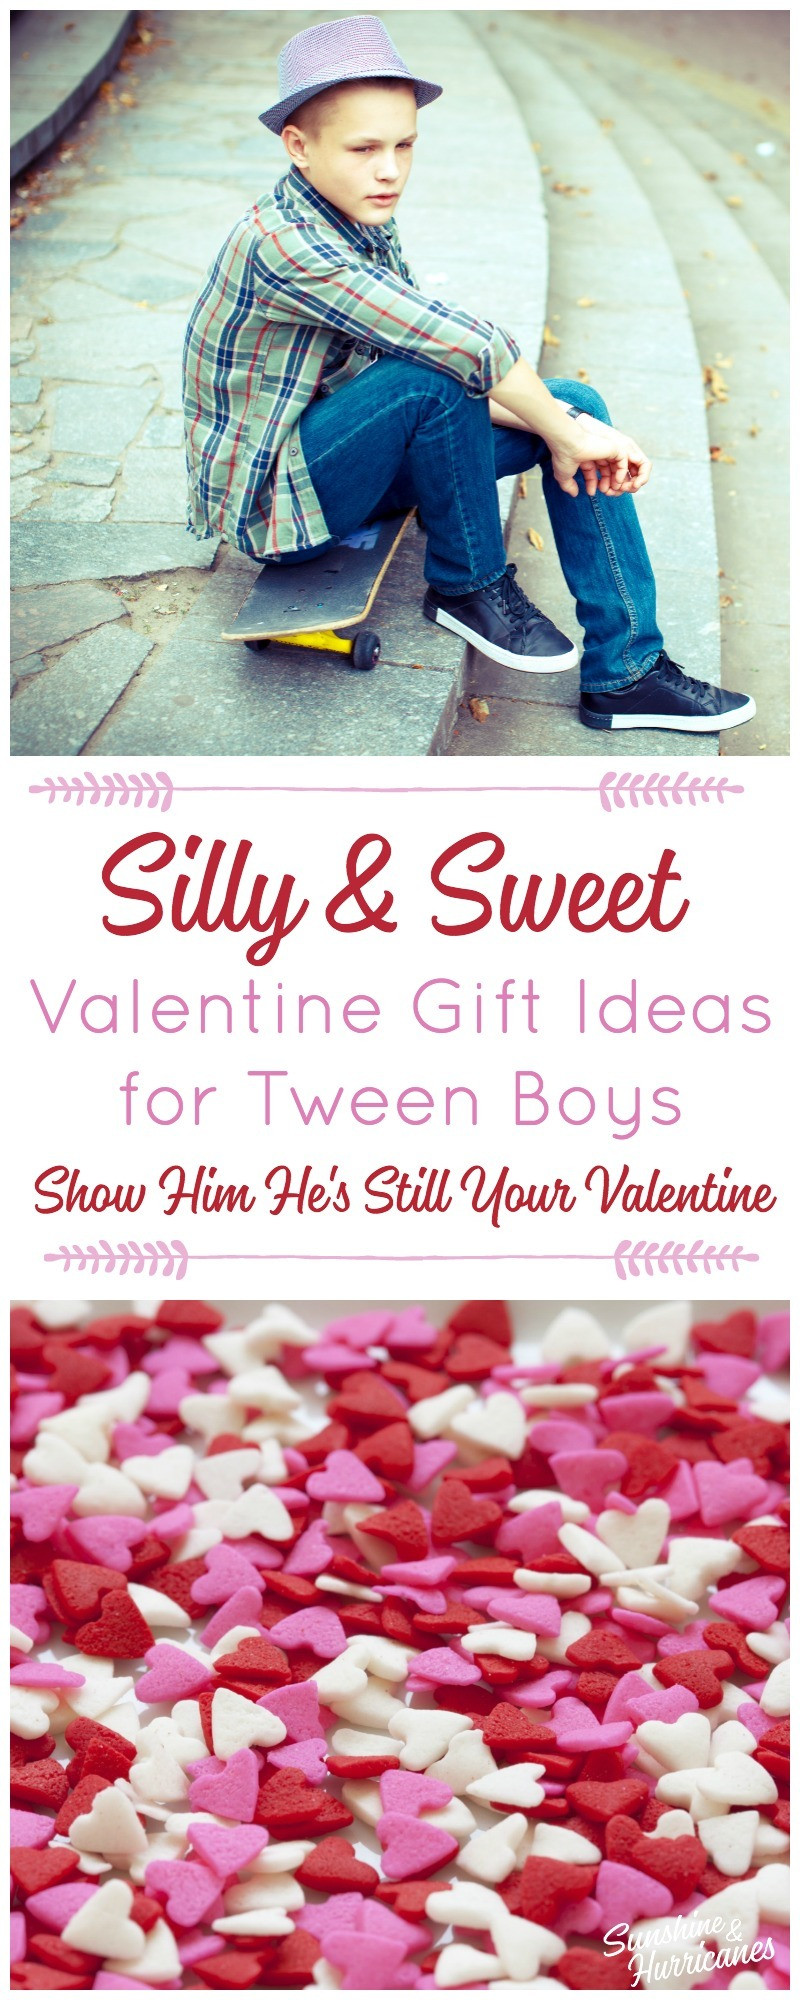 Valentine'S Day Gift Ideas For Boys
 Valentine Gifts for Tween Boys Sweet and Silly Just Like Him